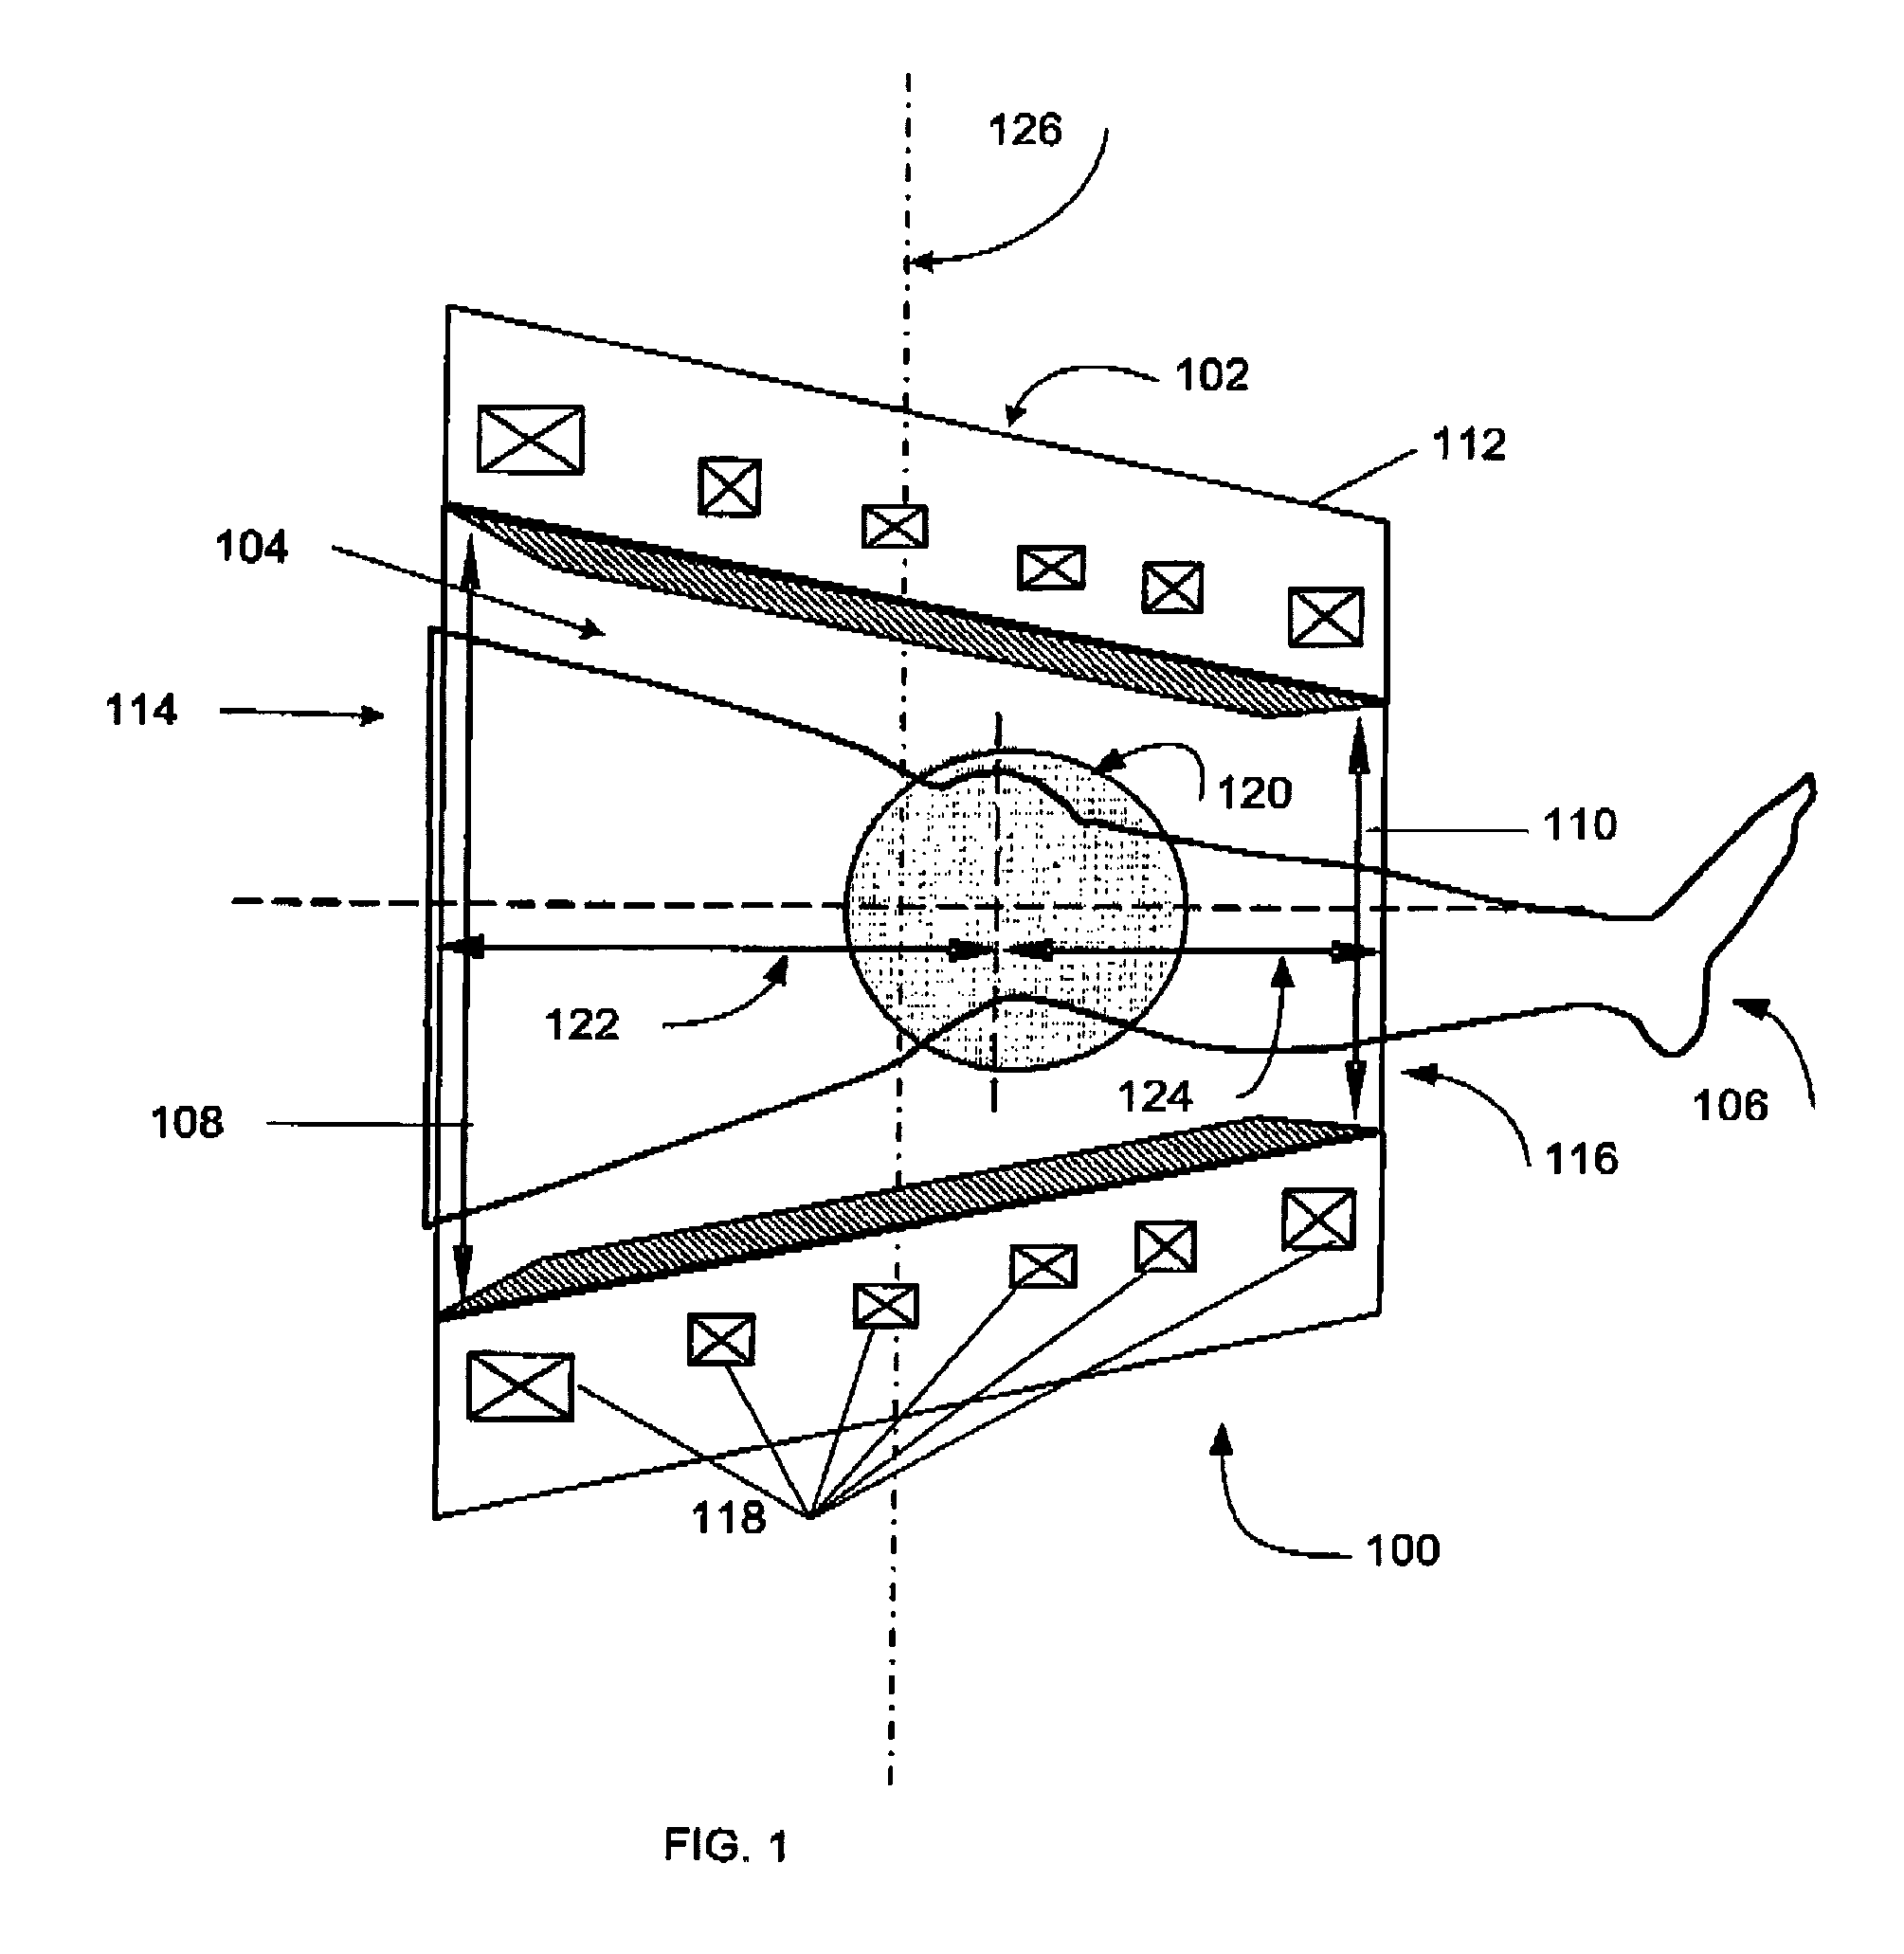 Systems, methods and apparatus for specialized magnetic resonance imaging with dual-access conical bore